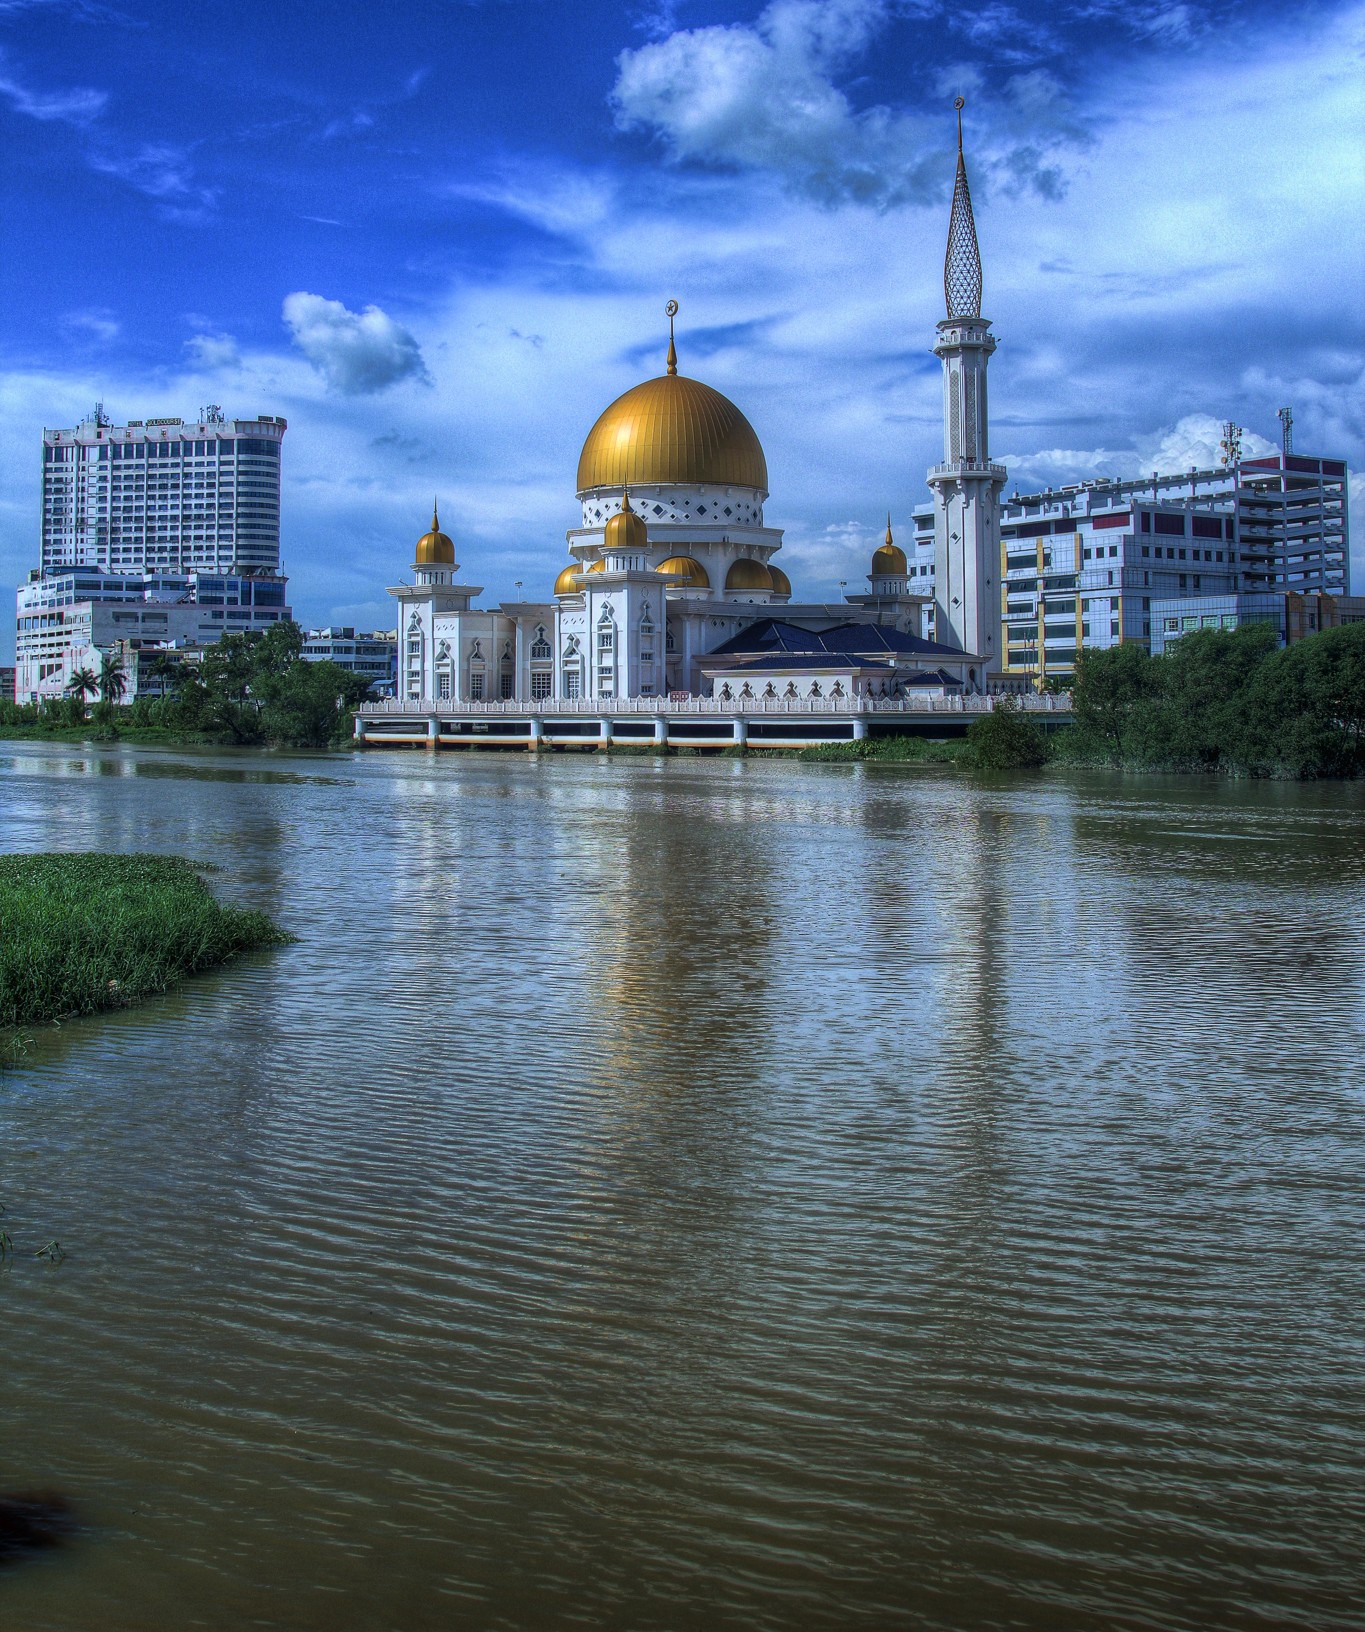 By Ahmad Rithauddin from Ampang, malaysia - Floating Mosque of Klang, CC BY 2.0, https://commons.wikimedia.org/w/index.php?curid=24298720